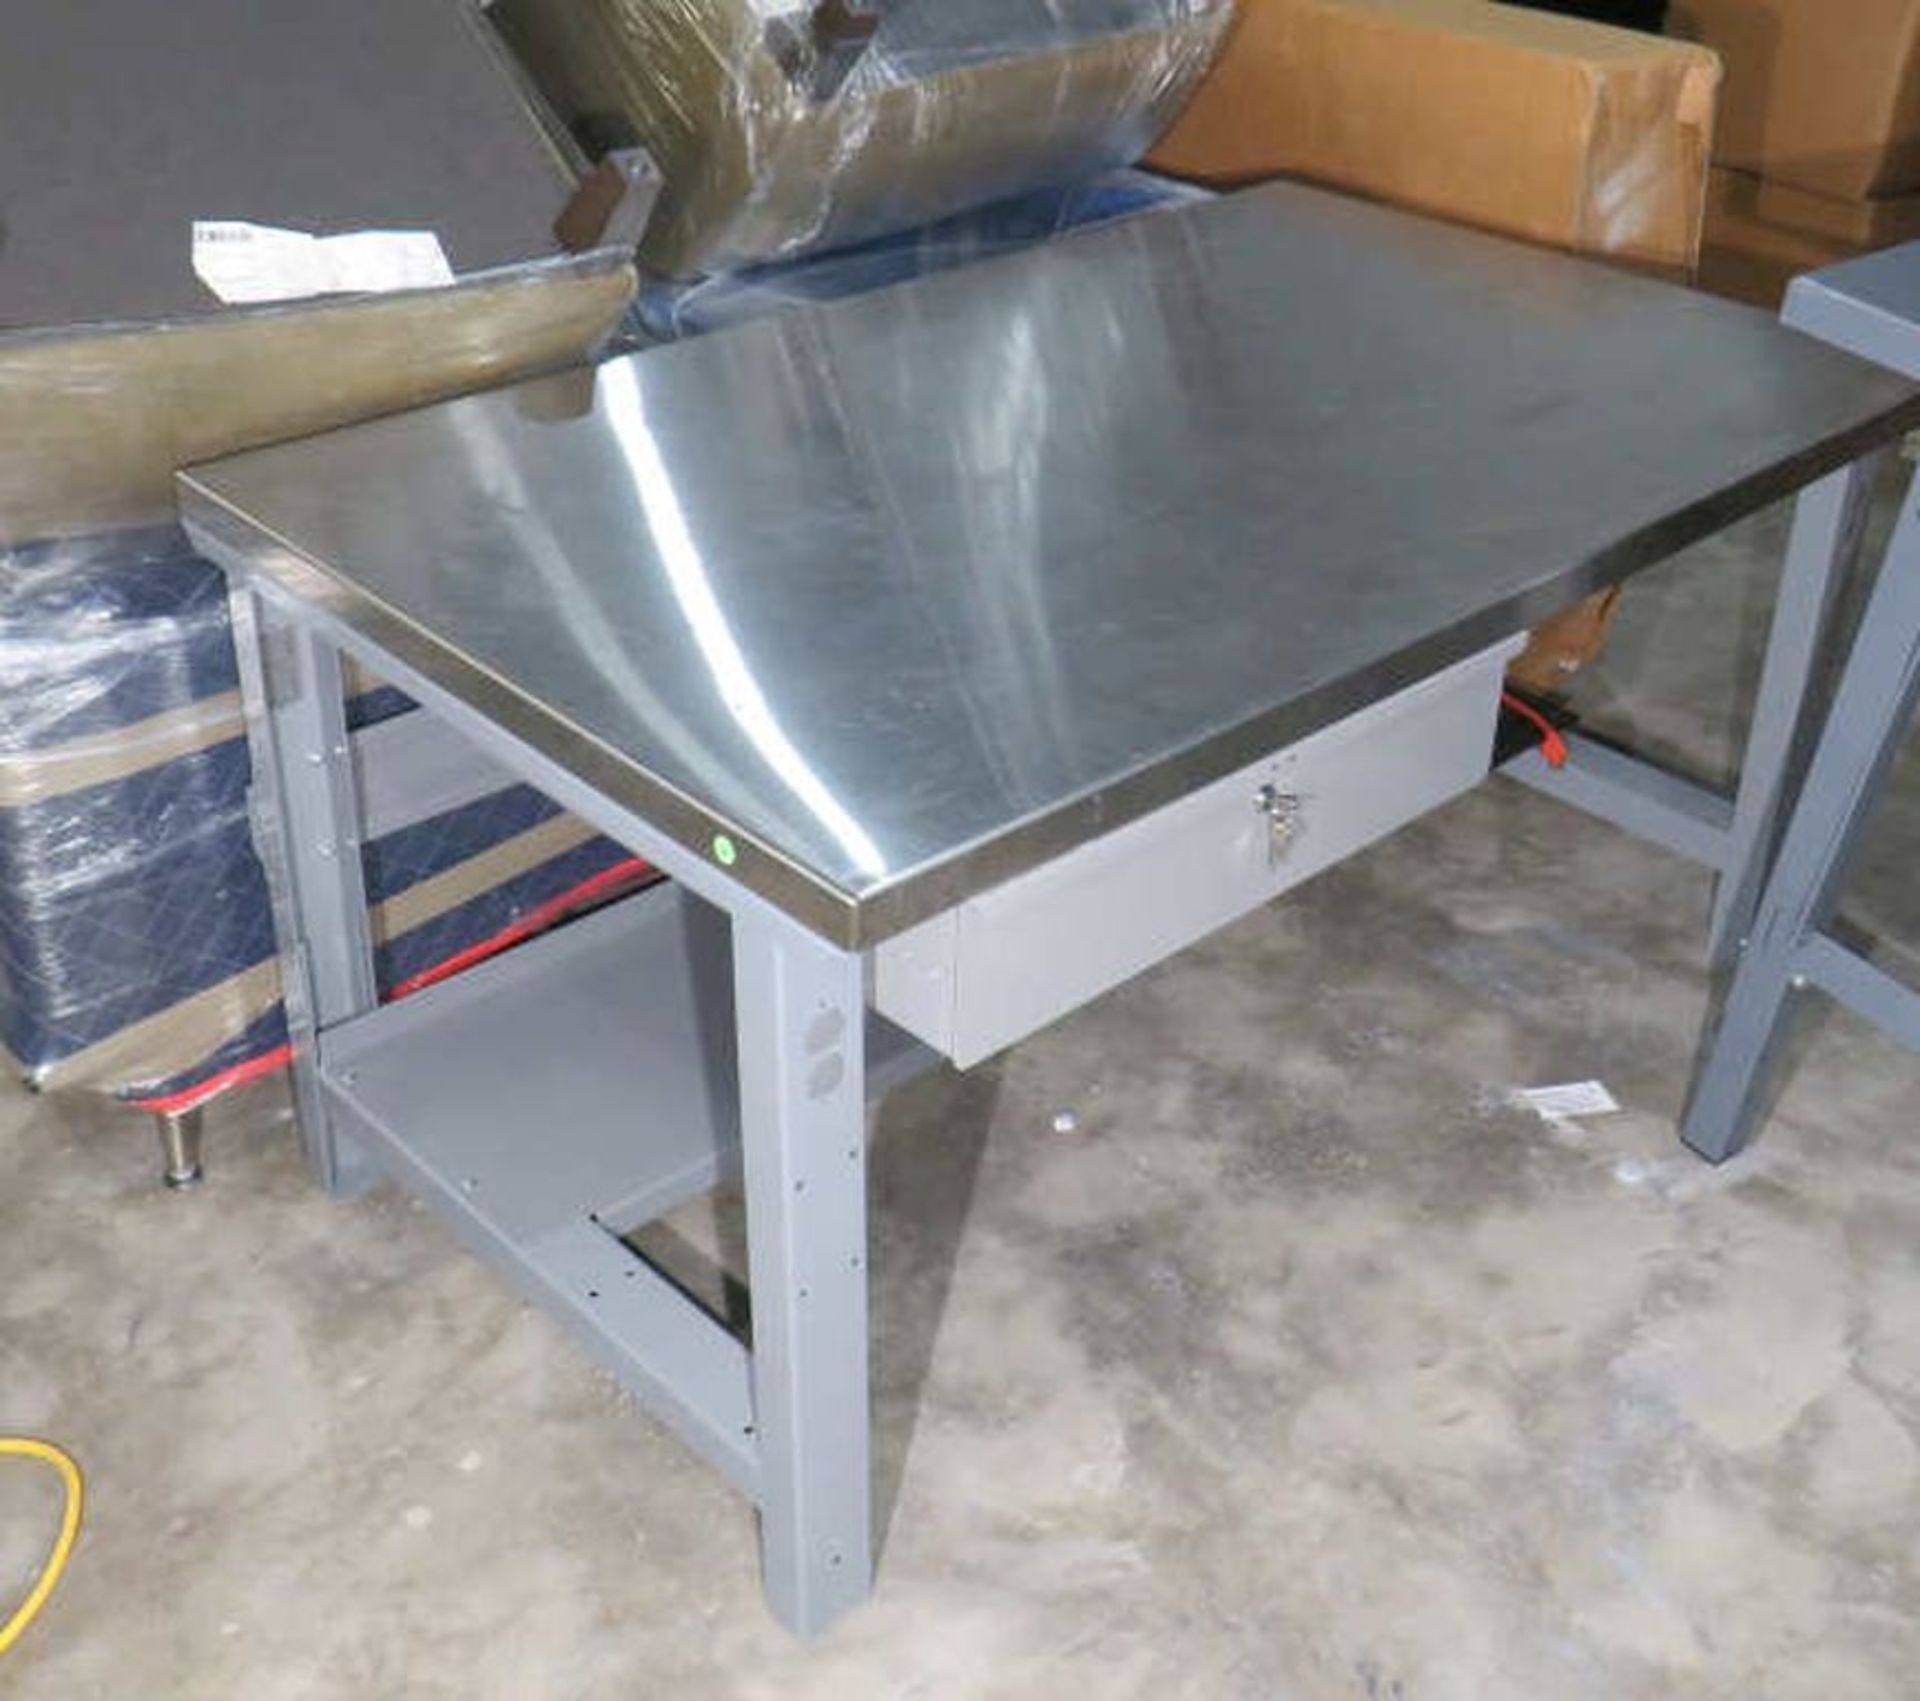 Stainless Steel Top, Industrial Table, 48"x 30", adjustable height, Locking Front Drawer